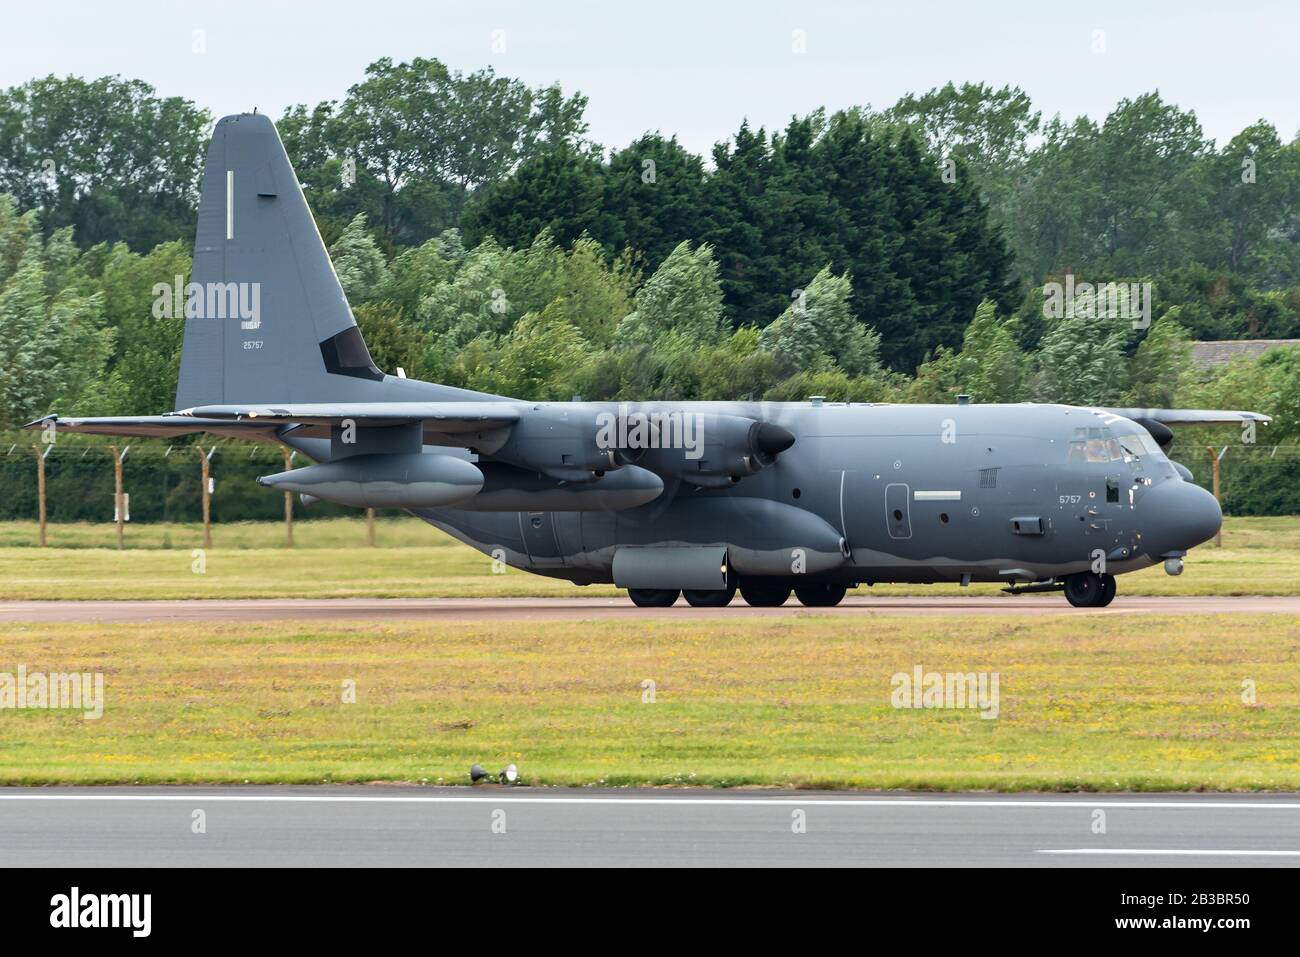 A Lockheed Martin MC-130J Commando II special mission aircraft of the 352nd Special Operations Wing operated by the United States Air Force. Stock Photo